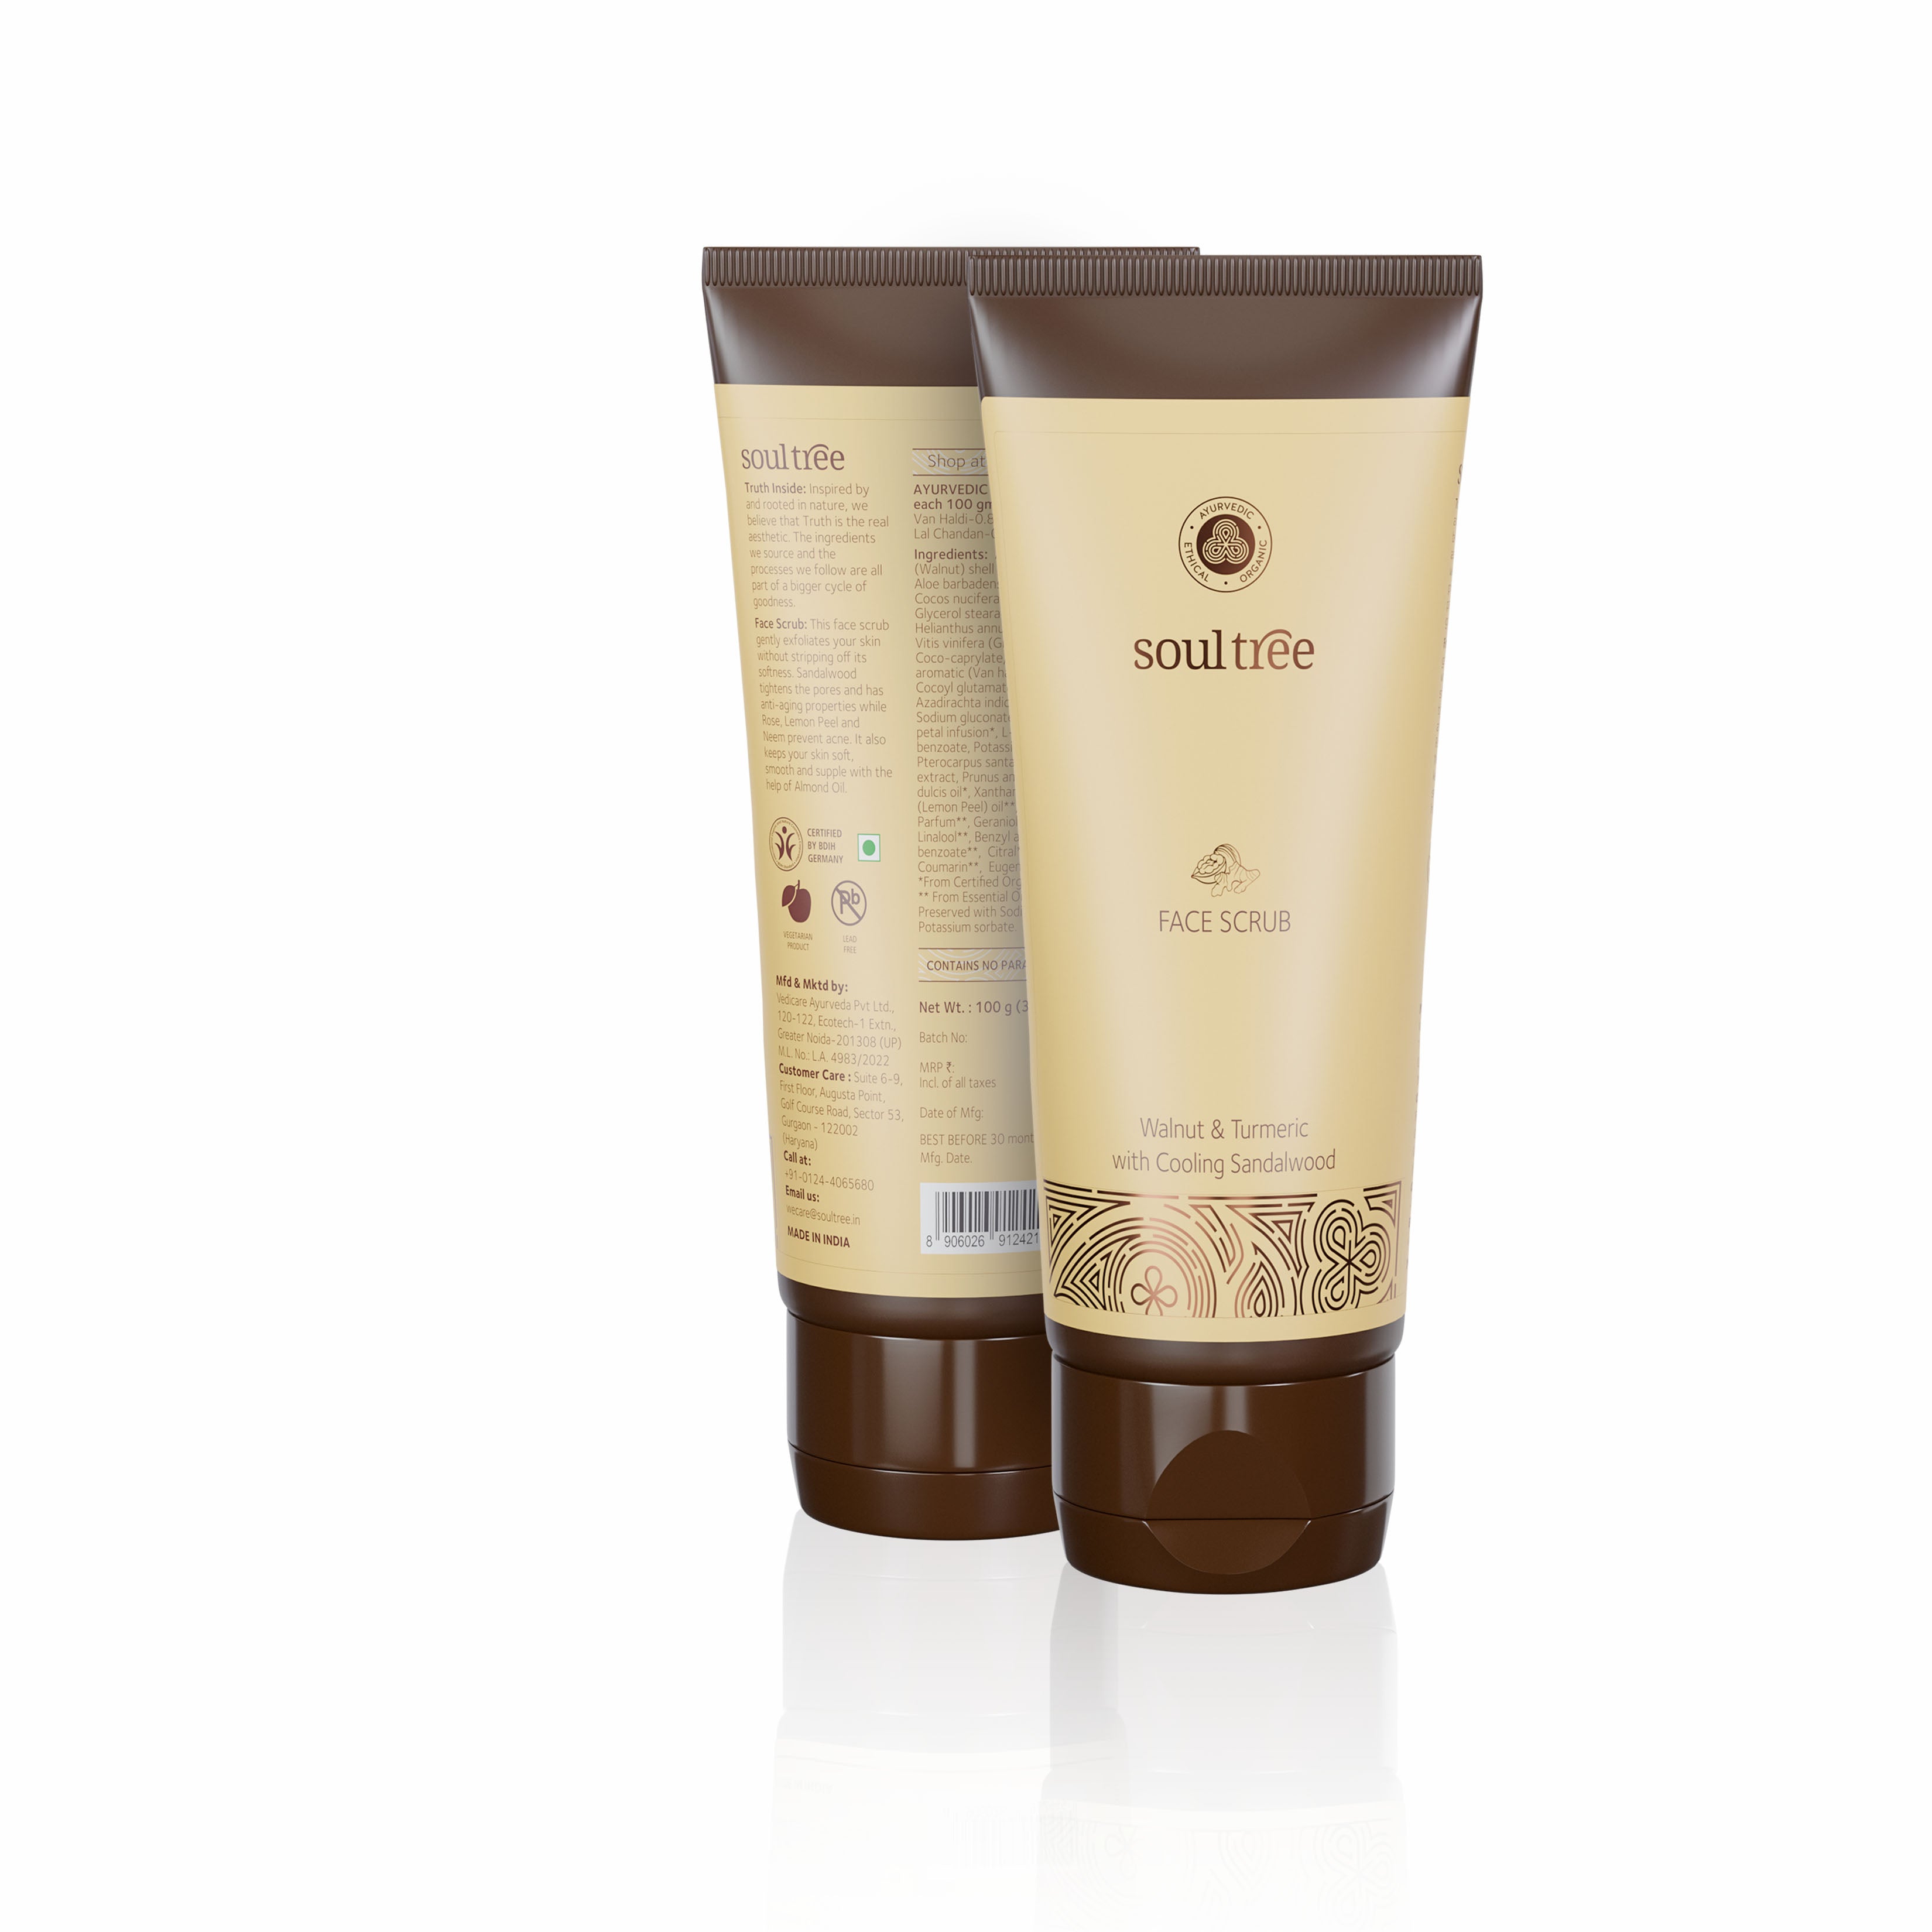 Face Scrub - Walnut & Turmeric with Cooling Sandalwood - SoulTree